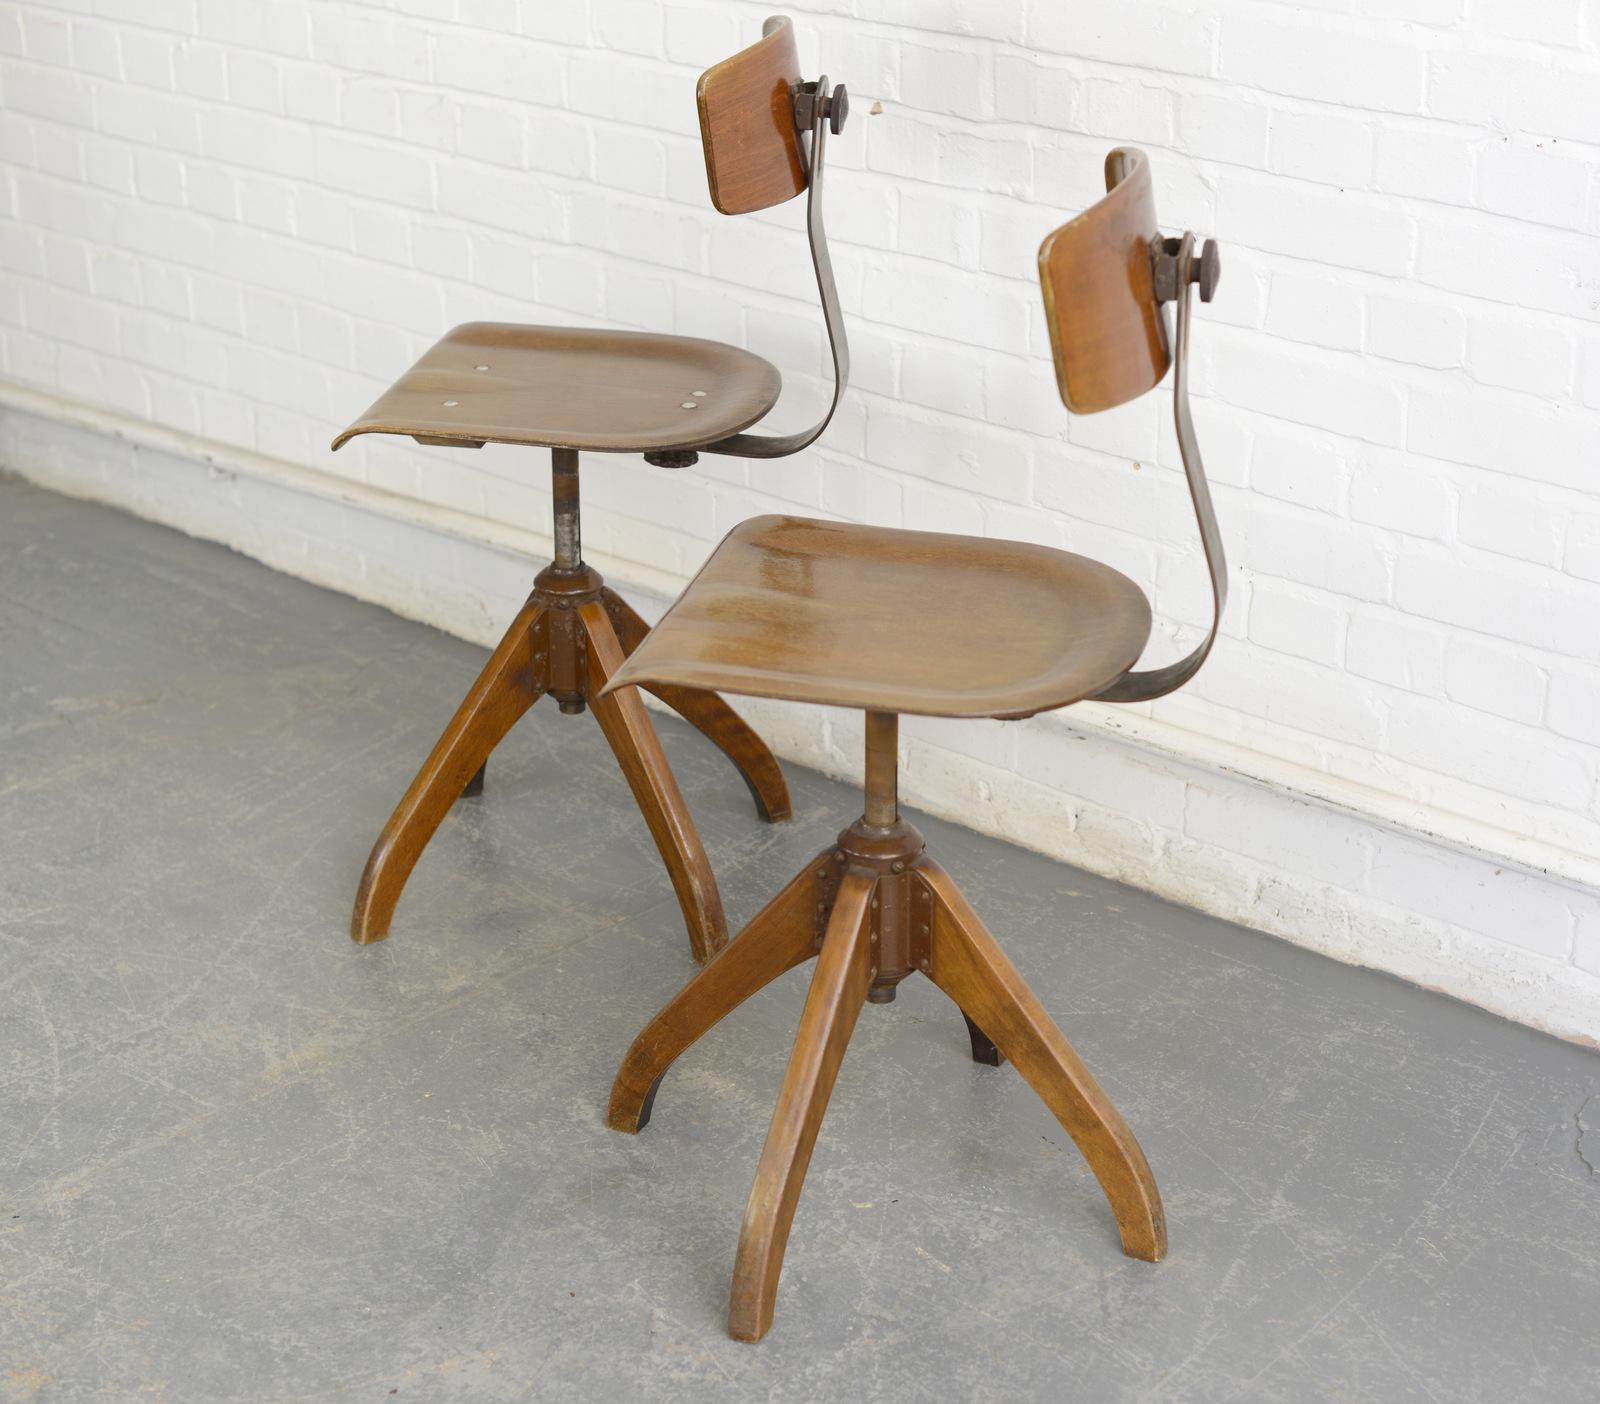 Machinists chairs by Ama Elastik, circa 1930s.

- Price is per chair 
- Sprung seat and backrest
- Height adjustable
- Beech seat and backrest
- Each chair is marked with the DRGM stamp
- German, circa 1930s.
- Measures: 39cm wide x 43cm